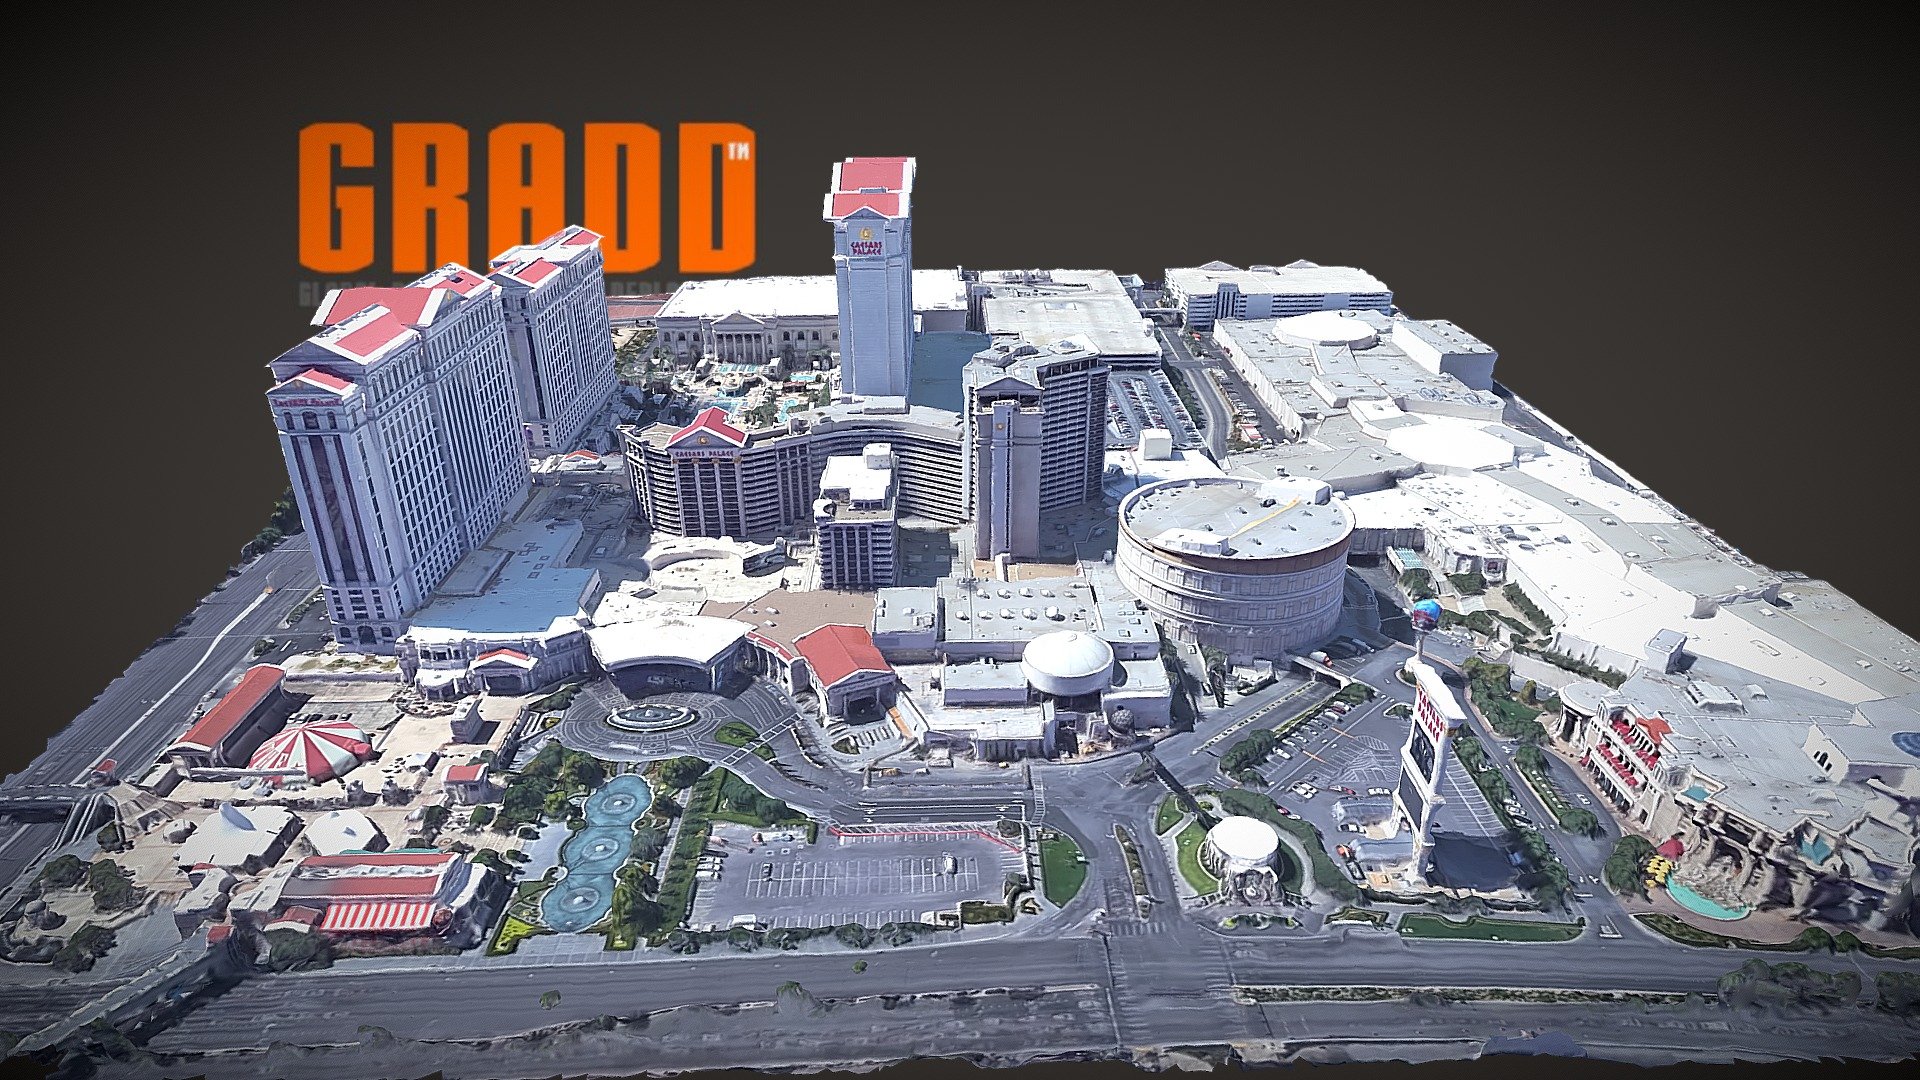 GRADD 3D Model of Caesars Palace, Las Vegas

Caesars Palace is a AAA Four Diamond luxury hotel and casino in Paradise, Nevada, United States. The hotel is situated on the west side of the Las Vegas Strip between Bellagio and The Mirage. It is one of the most prestigious casino hotels in the world and one of Las Vegas's largest and best known landmarks.[1][2]

Caesars Palace was established in 1966 by Jay Sarno, who sought to create an opulent facility that gave guests a sense of life during the Roman Empire. It contains many statues, columns, and iconography typical of Hollywood Roman period productions including a 20-foot (6.1 m) statue of Julius Caesar near the entrance. Caesars Palace is now owned and operated by Caesars Entertainment. As of July 2016, the hotel has 3,976 rooms and suites in six towers and a convention facility of over 300,000 square feet (28,000 m2). The hotel has a large range of restaurants. 

From Wikipedia, the free encyclopedia - GRADD 3D Model of Caesars Palace, Las Vegas - Buy Royalty Free 3D model by GRADD 3d model